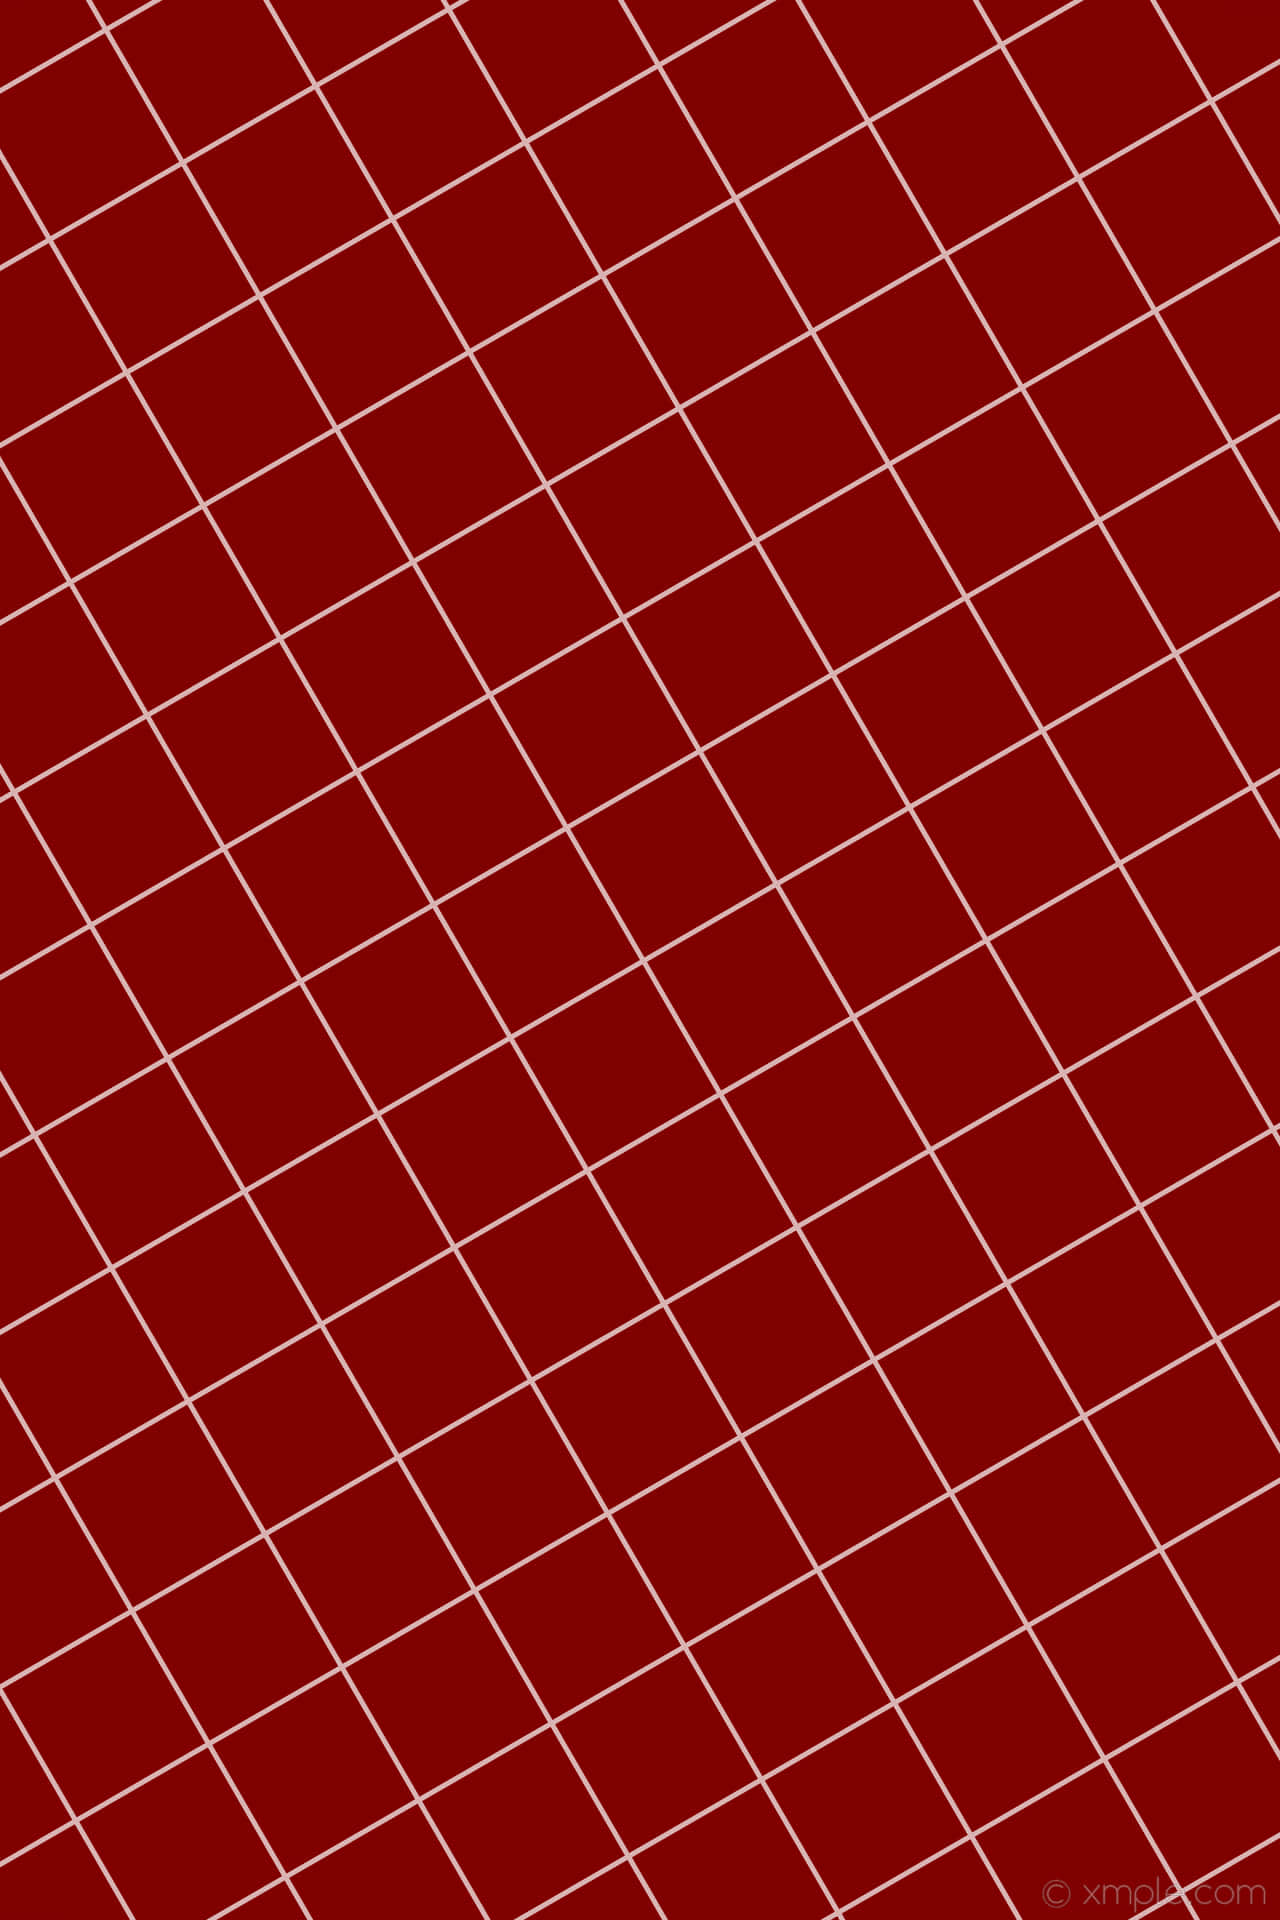 A Red Square Tiled Background With White Lines Wallpaper